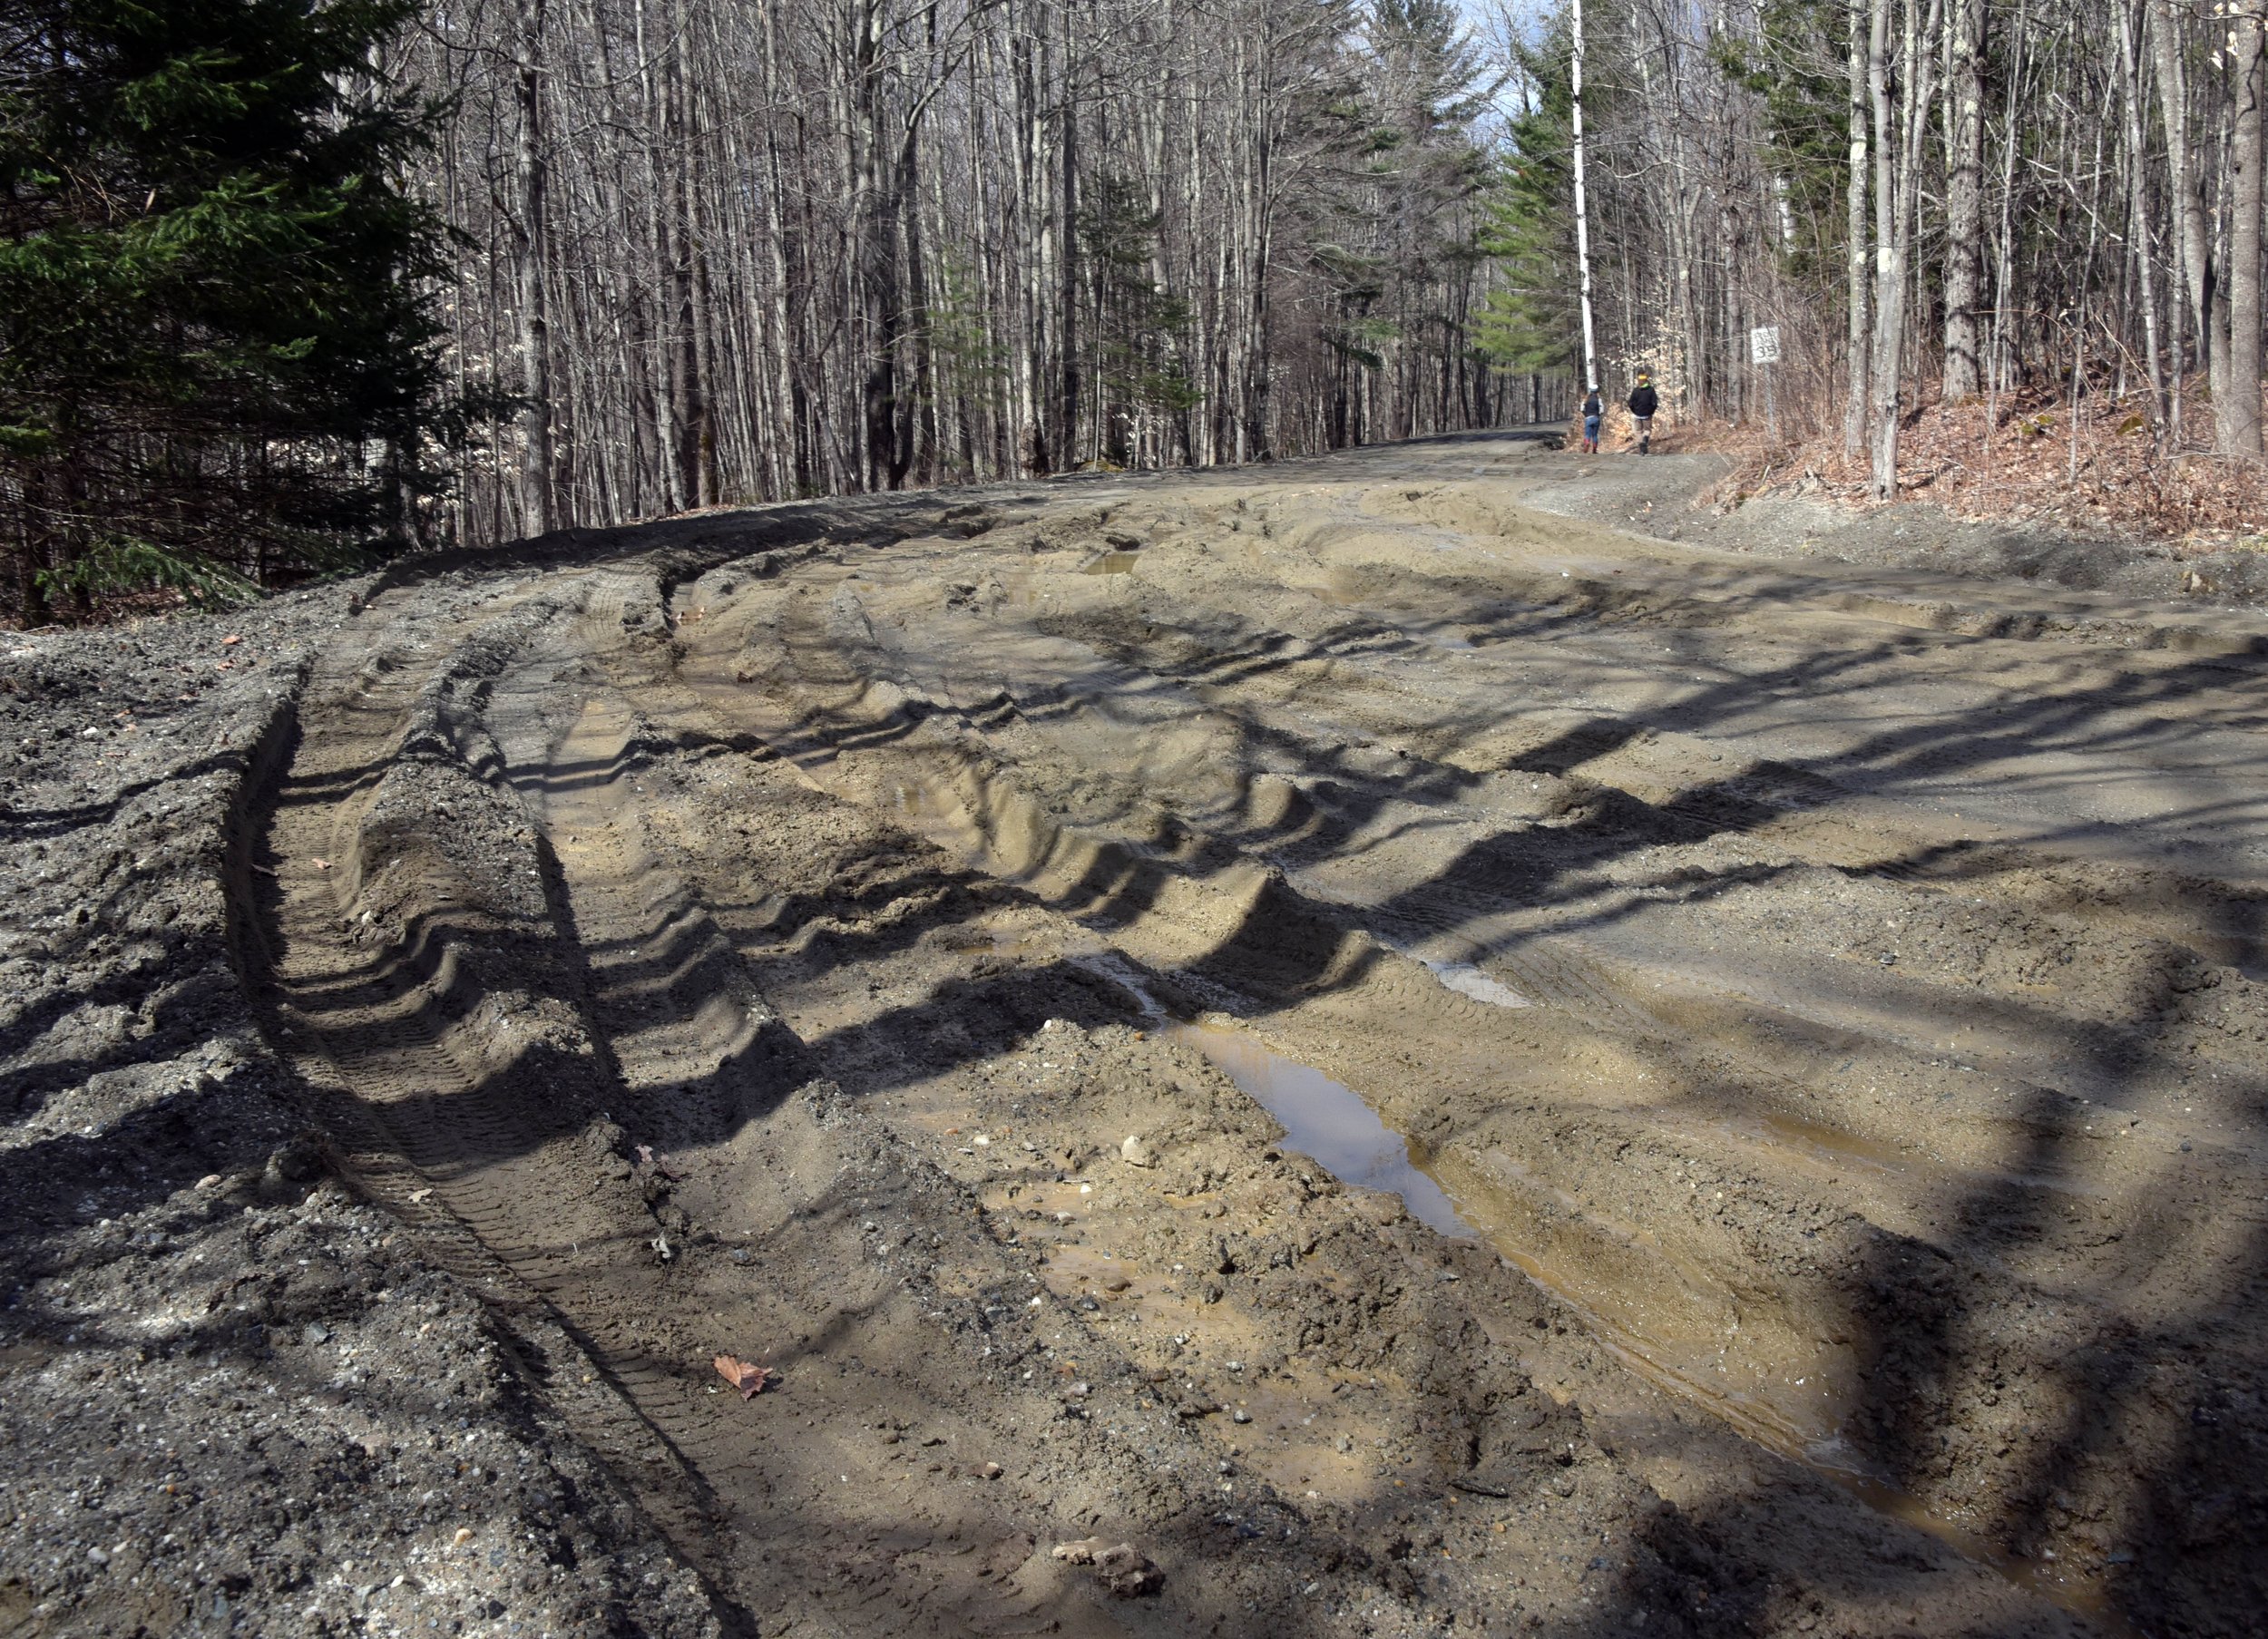  Shadows cast a zig-zag pattern on the muddy ruts along Valley View Road. Photo by Gordon Miller 